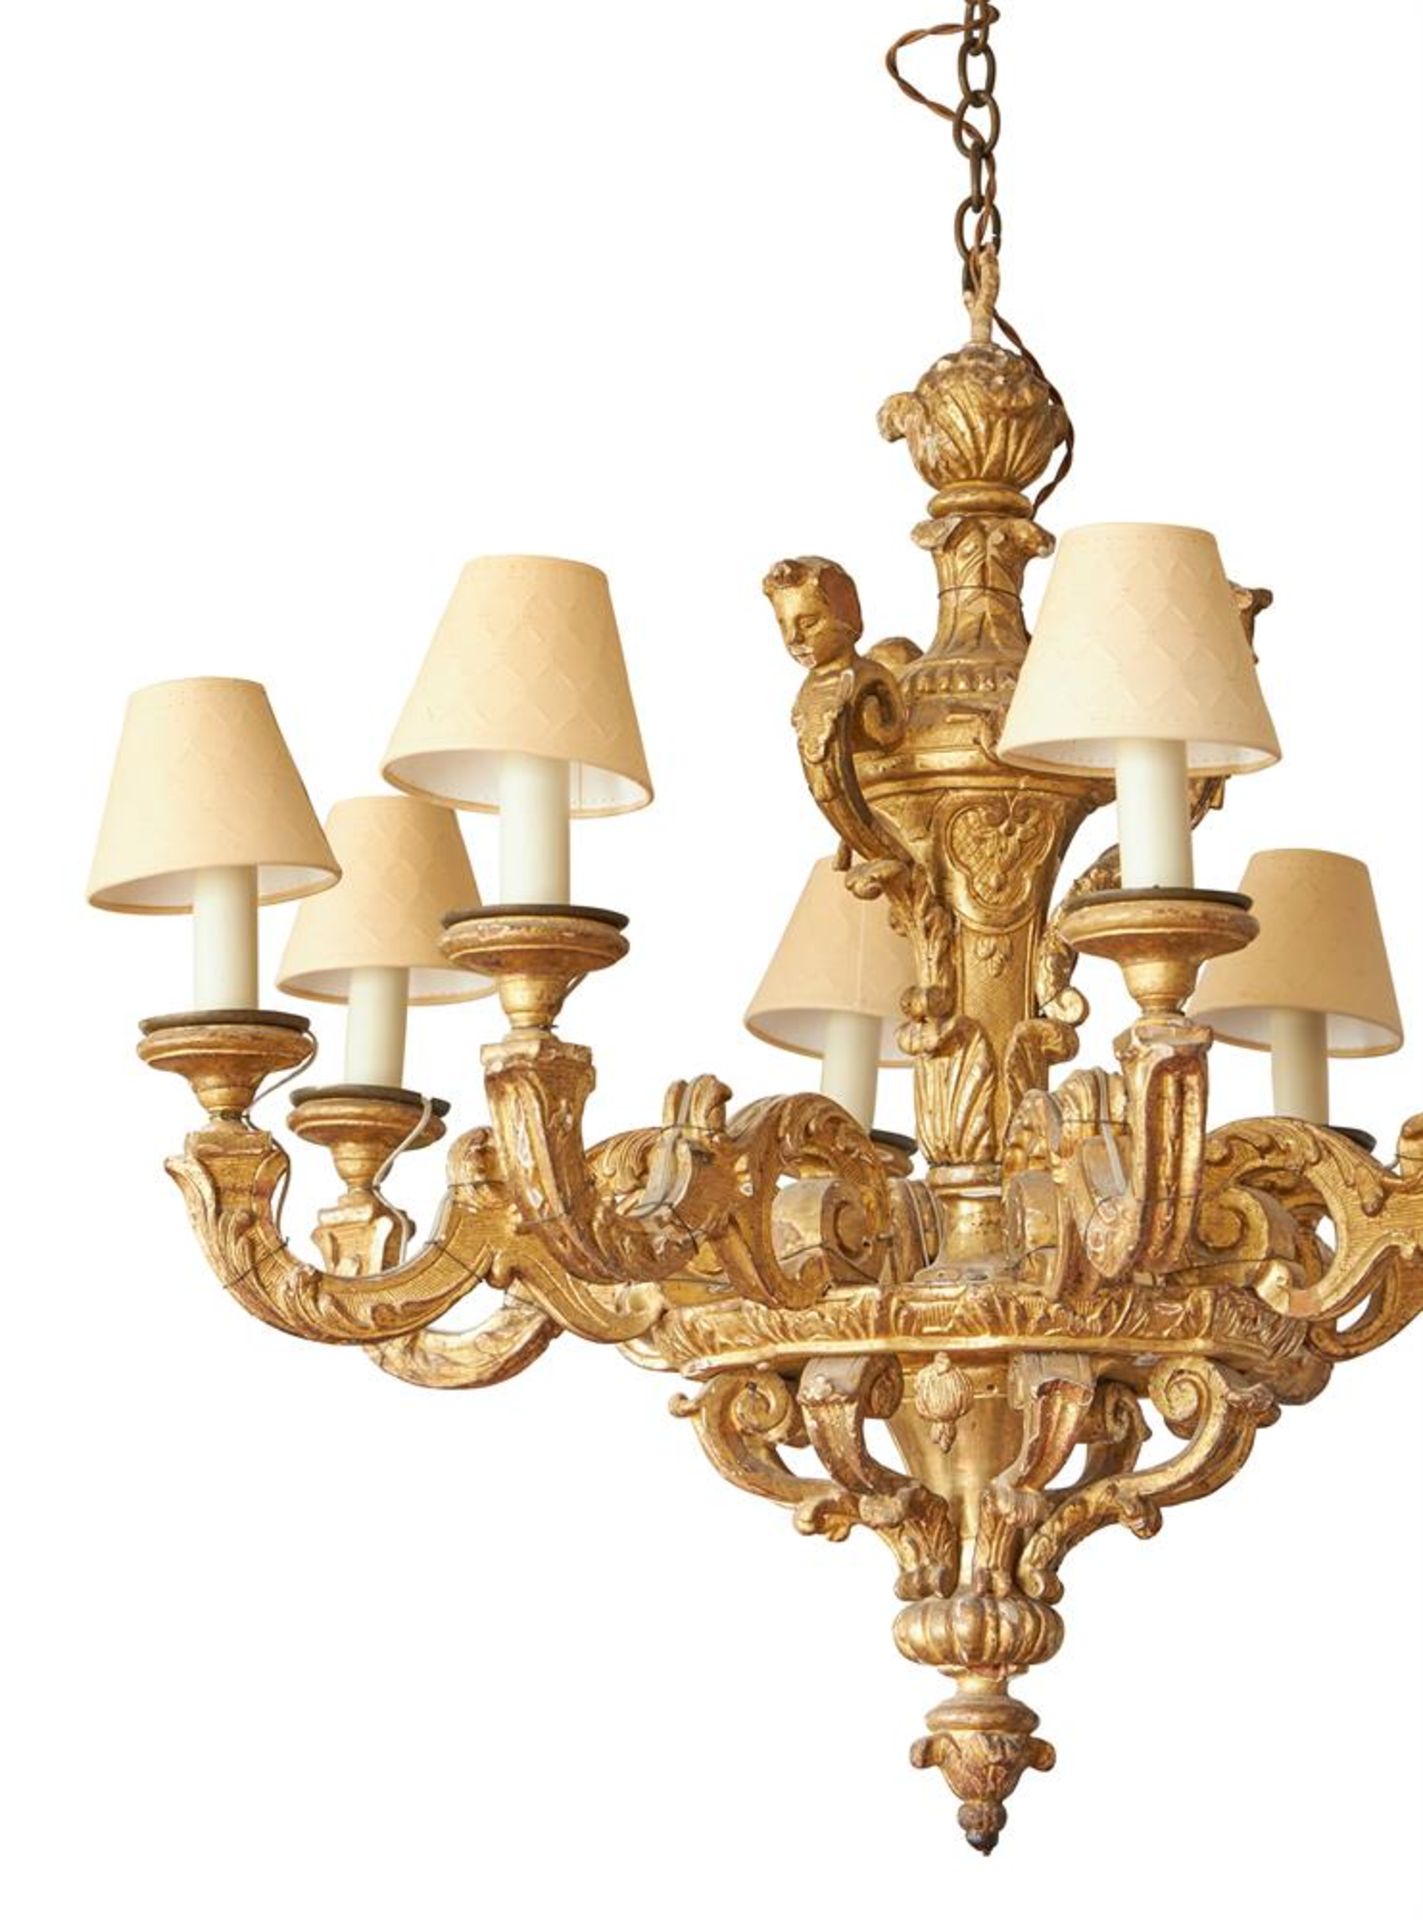 A CARVED GILTWOOD EIGHT LIGHT CHANDELIER FRENCH, AFTER ANDRE-CHARLES BOULLE, EARLY 18TH CENTURY - Image 4 of 5